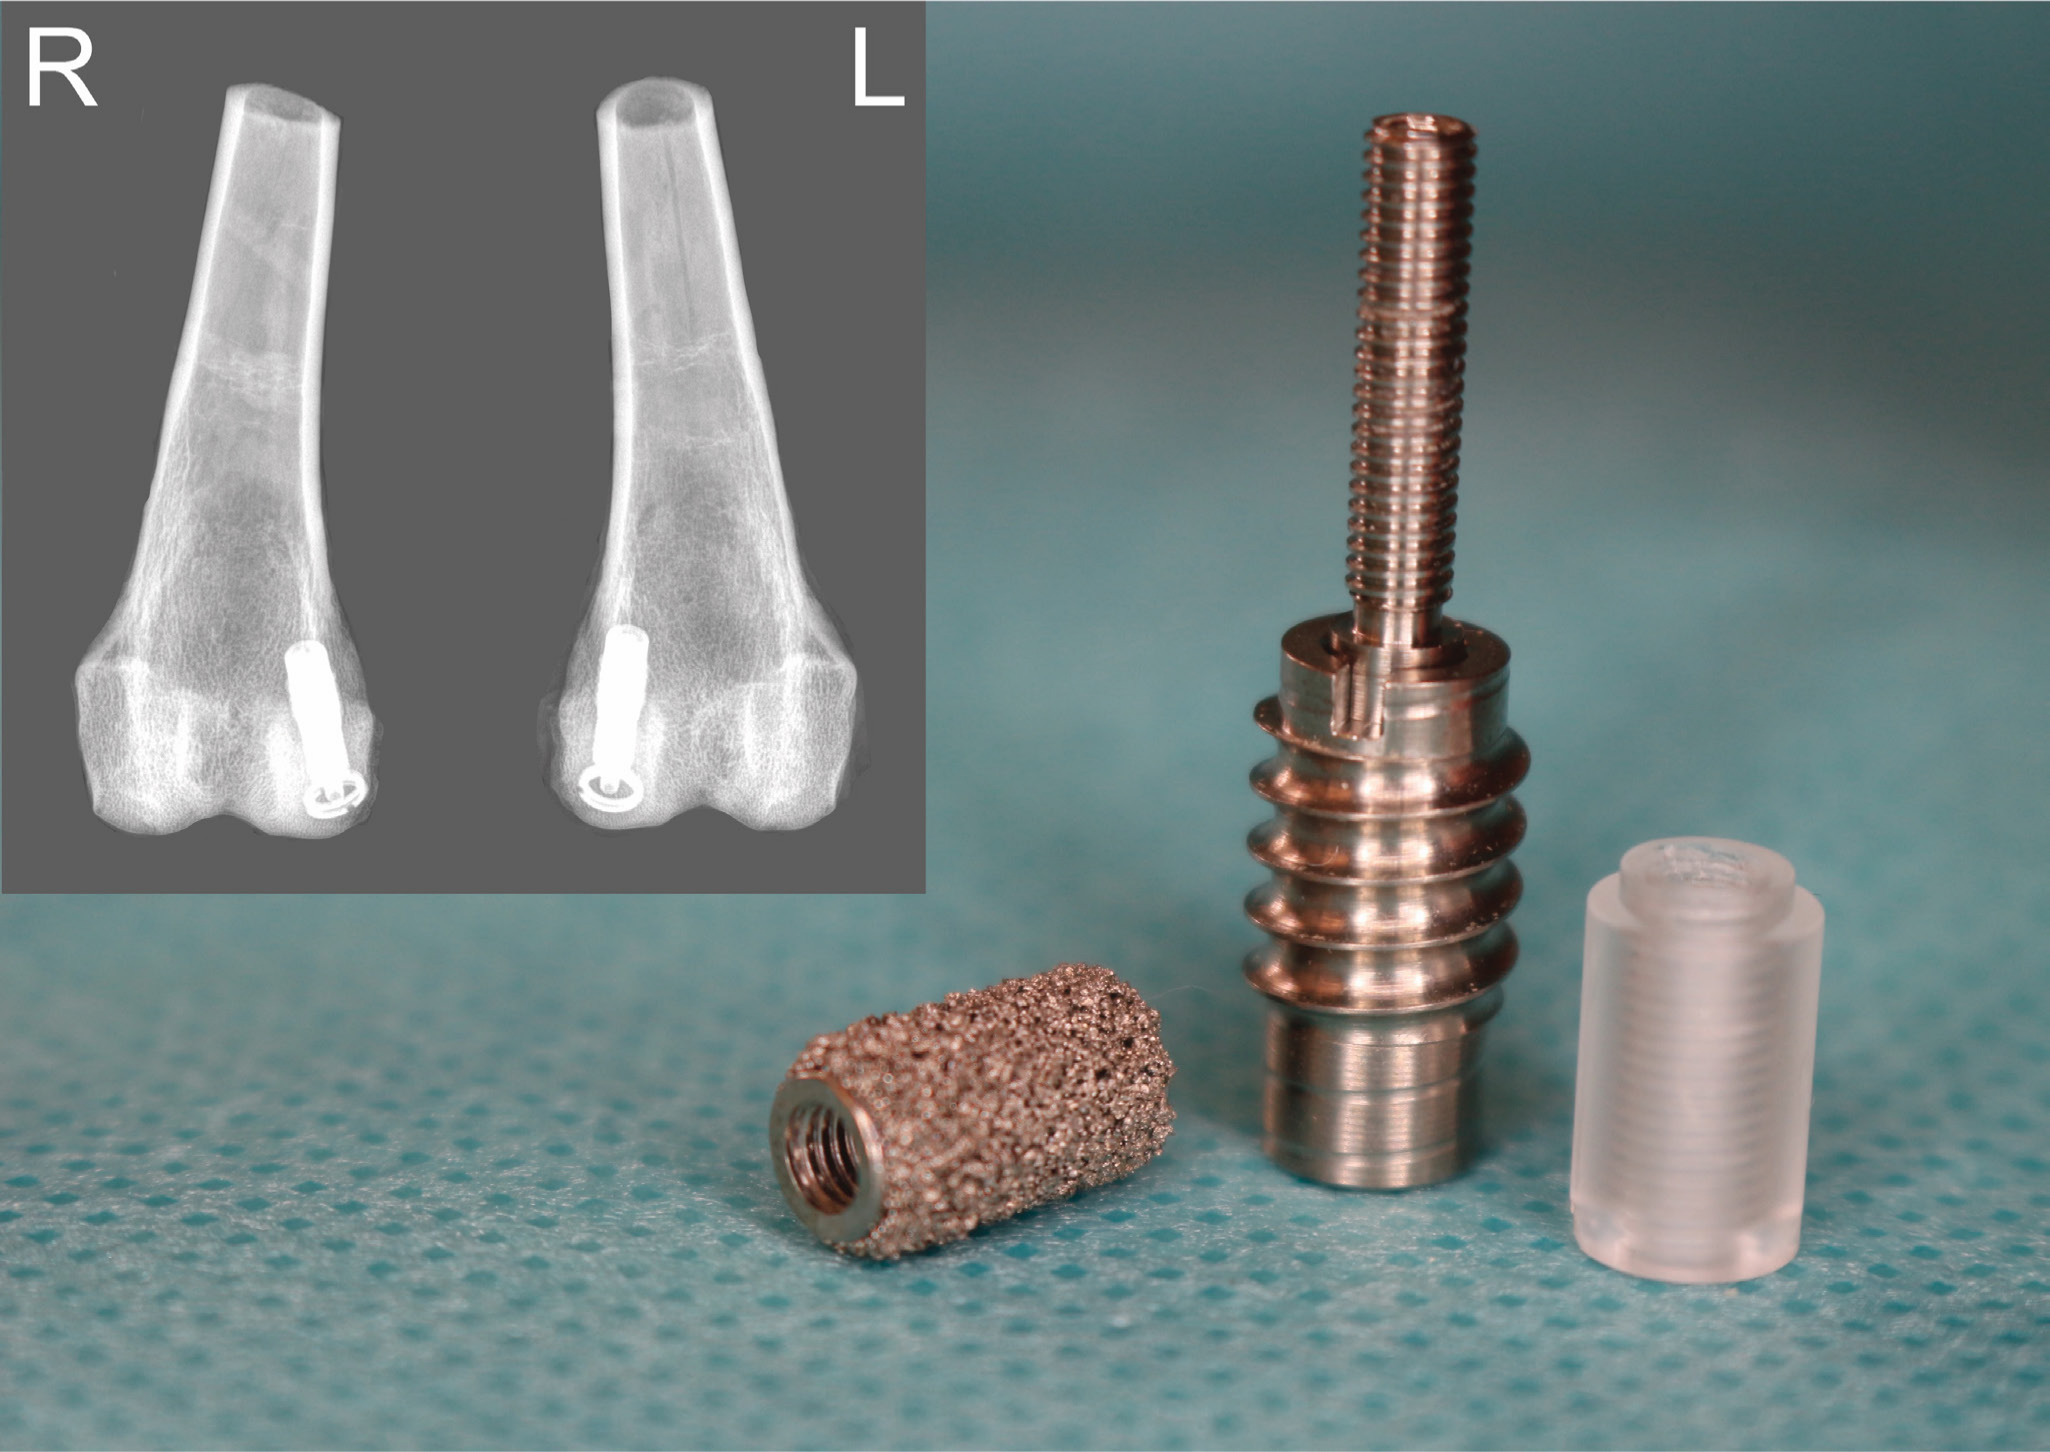 Fig. 1 
            Micromotion device (centre) with a titanium implant (left) and a poly(methyl methacrylate) (PMMA) implant (right).The micromotion device consists of a self-tapping anchor house (bottom) to secure device position in the subchondral cancellous bone of the medial femur condyle (radiograph upper left). A threaded rod on top of a coil spring sits inside the anchor house body, allowing for axial rod movement relative to the anchor-house (top). The coil spring returns the threaded rod to its original position after its compression during stand and gait. The primary PMMA implant has a 500 µm-high receded rim at its base, enabling it to slide a mean 500 µm (standard deviation (SD) 15 µm) inside the anchor house when axially compressed producing an unstable condition. The revision titanium implant has stable conditions by being seated directly on top of the anchor house, preventing the rod from moving axially.
          